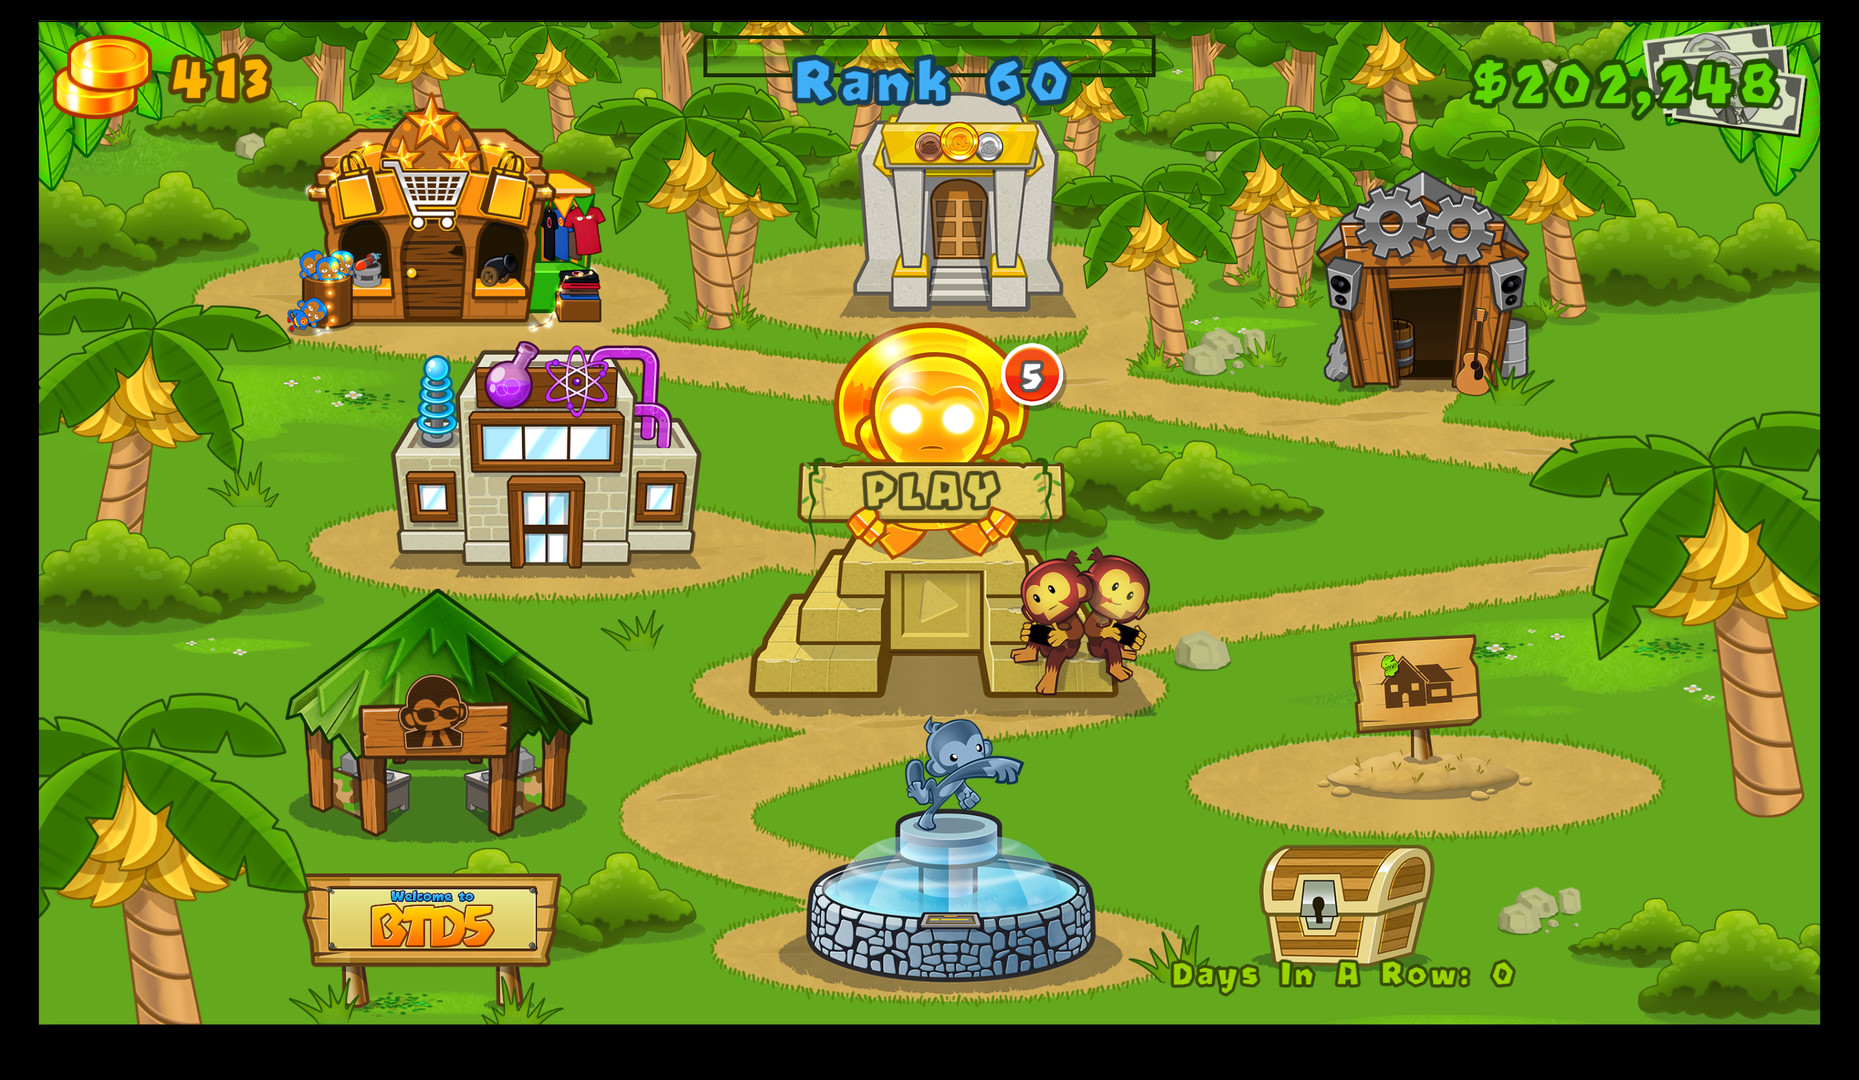 Where Can I Play Bloons Td 5 Deluxe 1 0 5 Game For Free